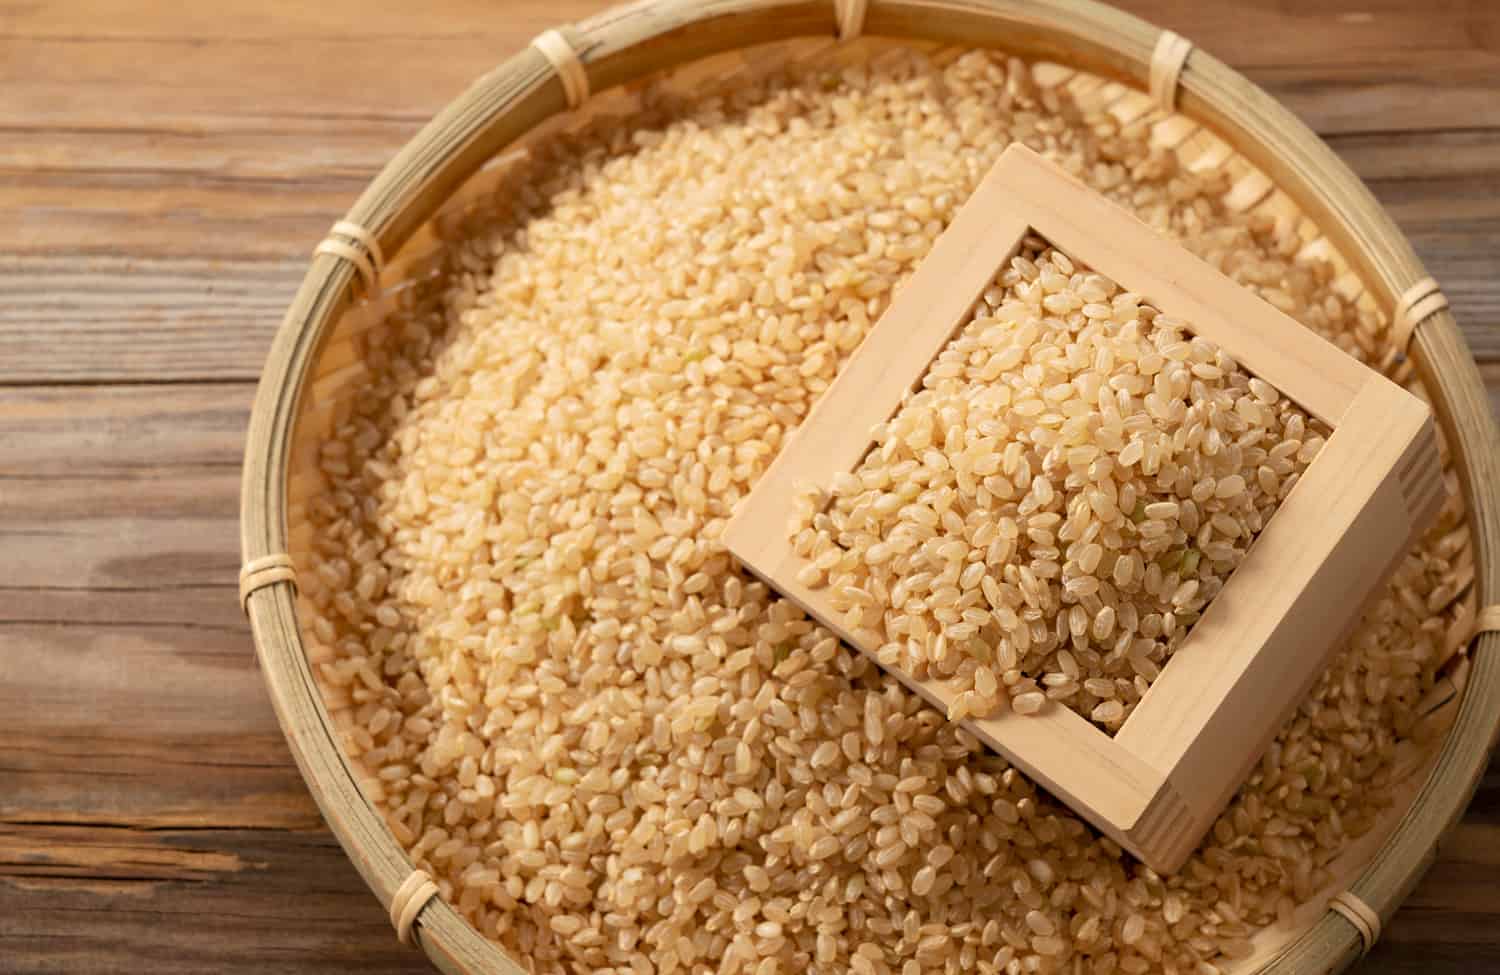 Brown rice in a wooden box and bamboo colander placed on a wooden background.